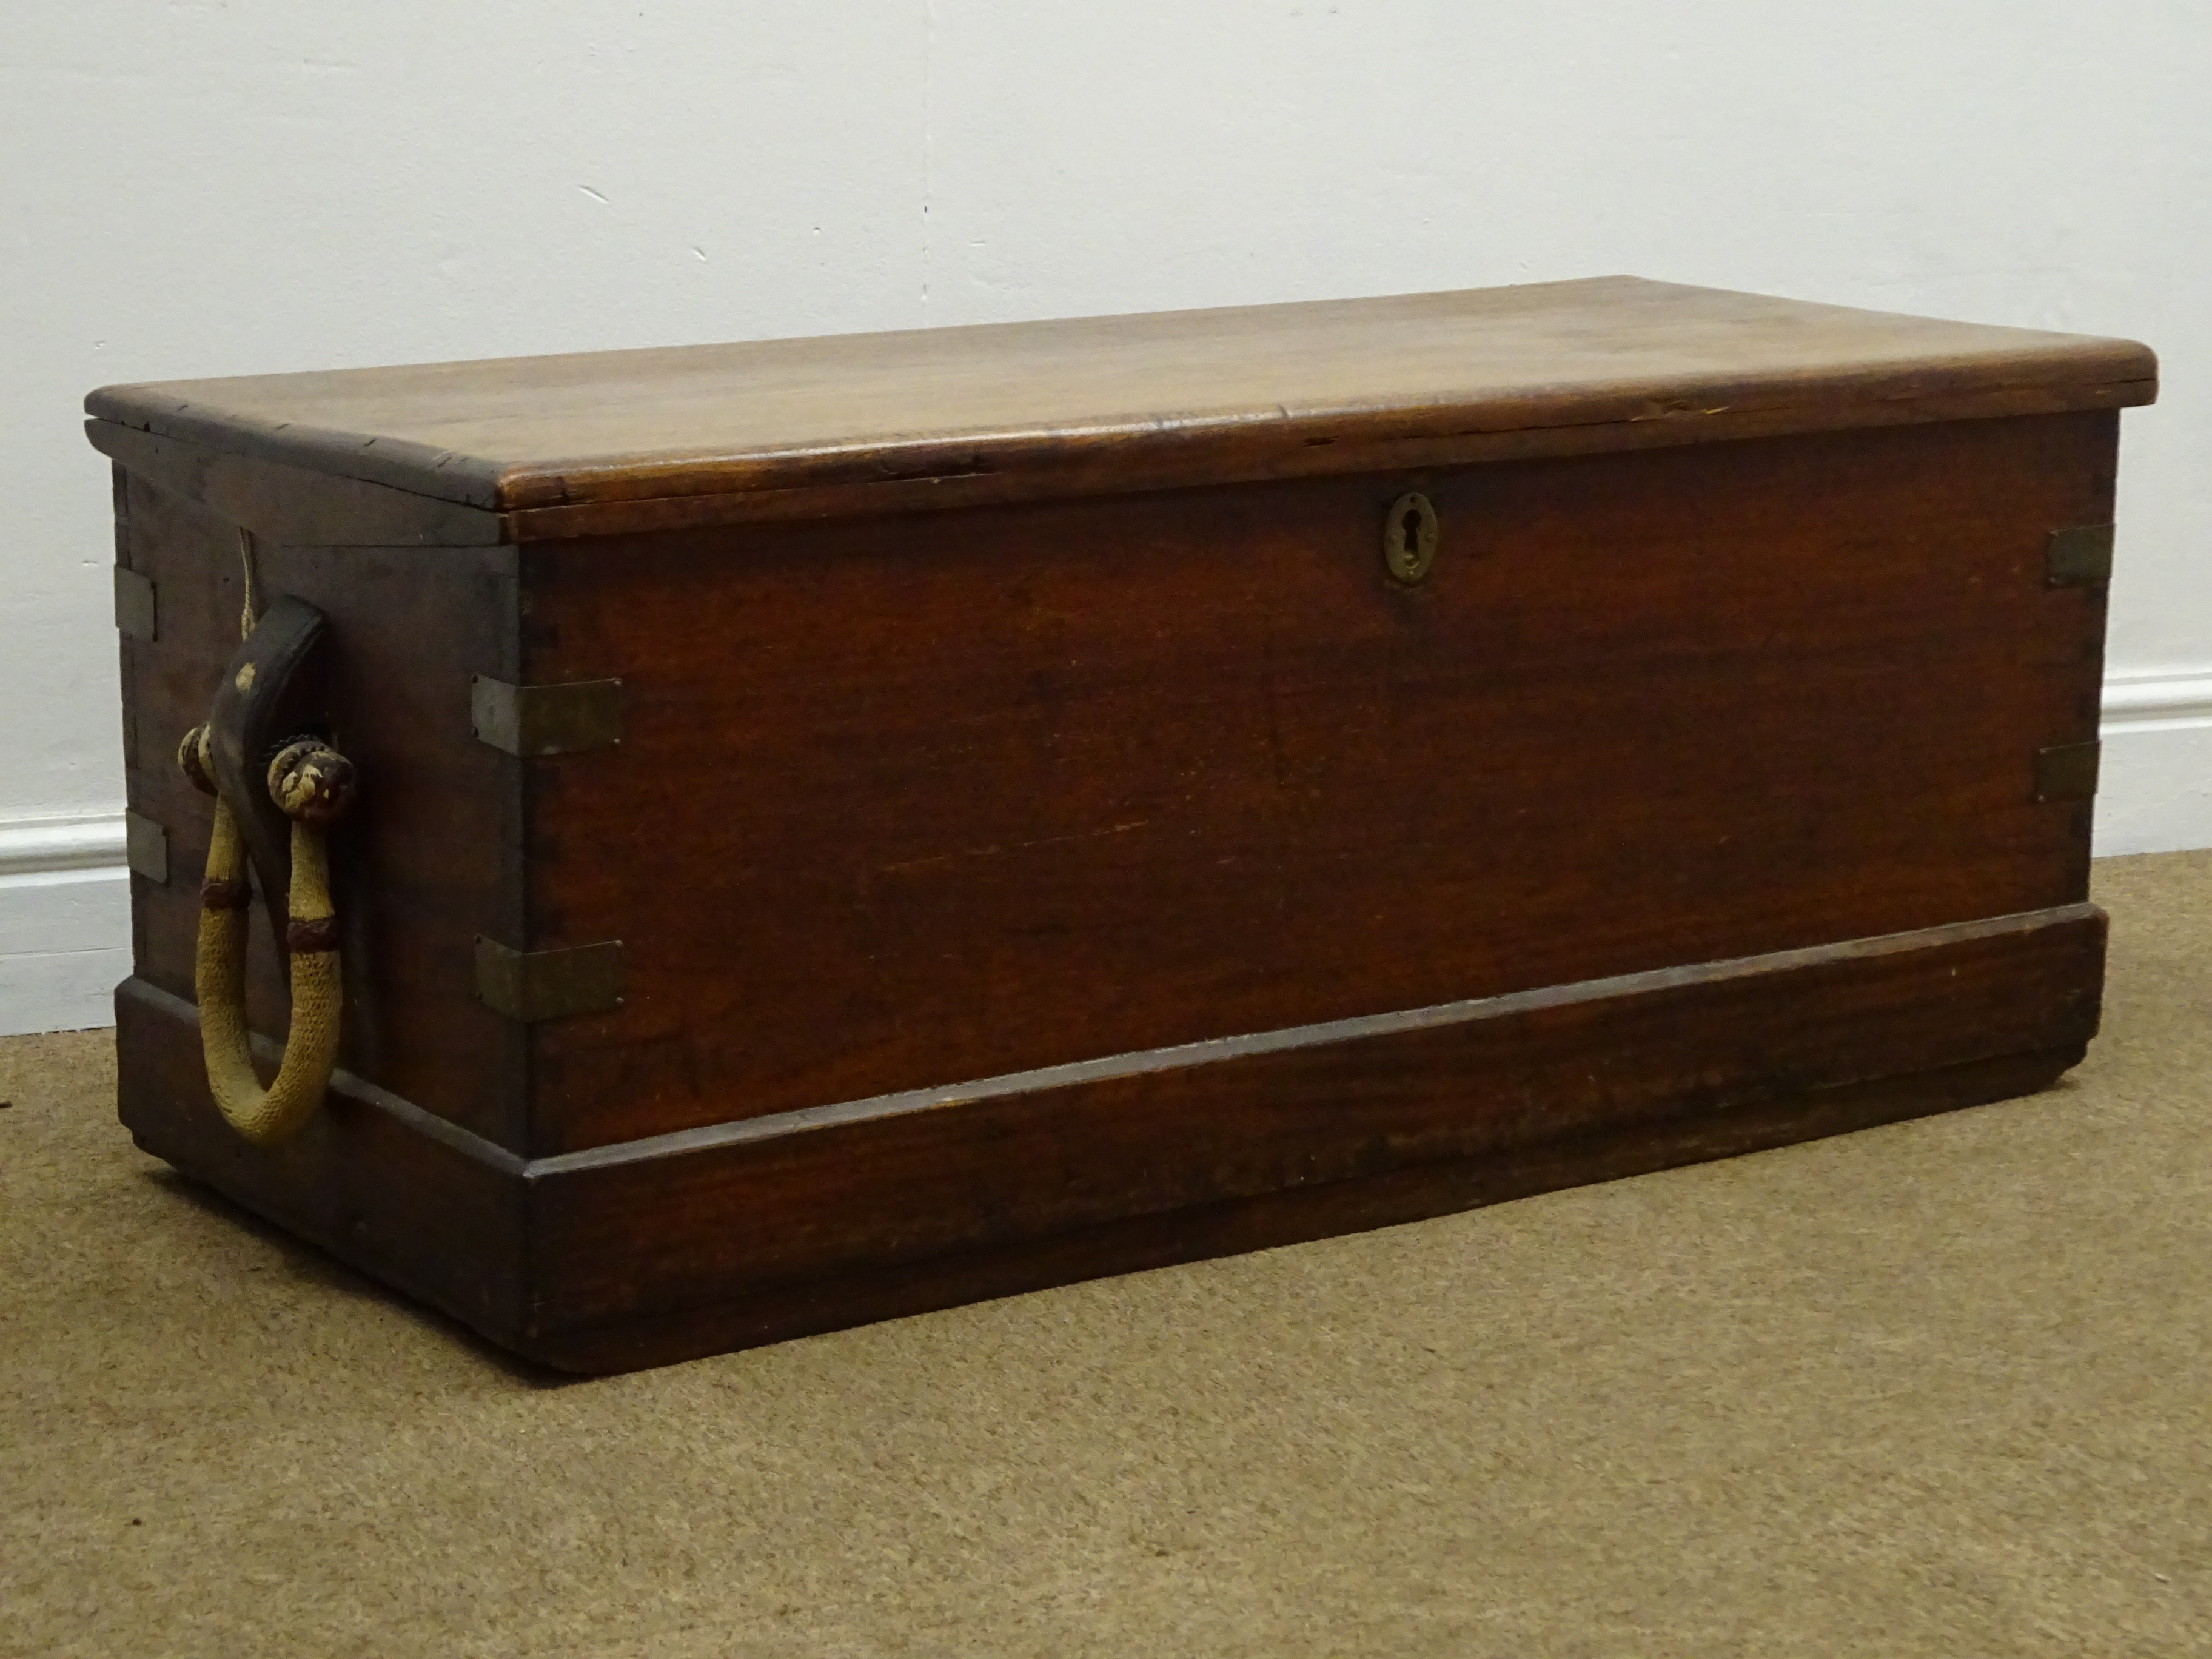 Camphor wood Seaman's chest,hinged lid with candle box and drawer,